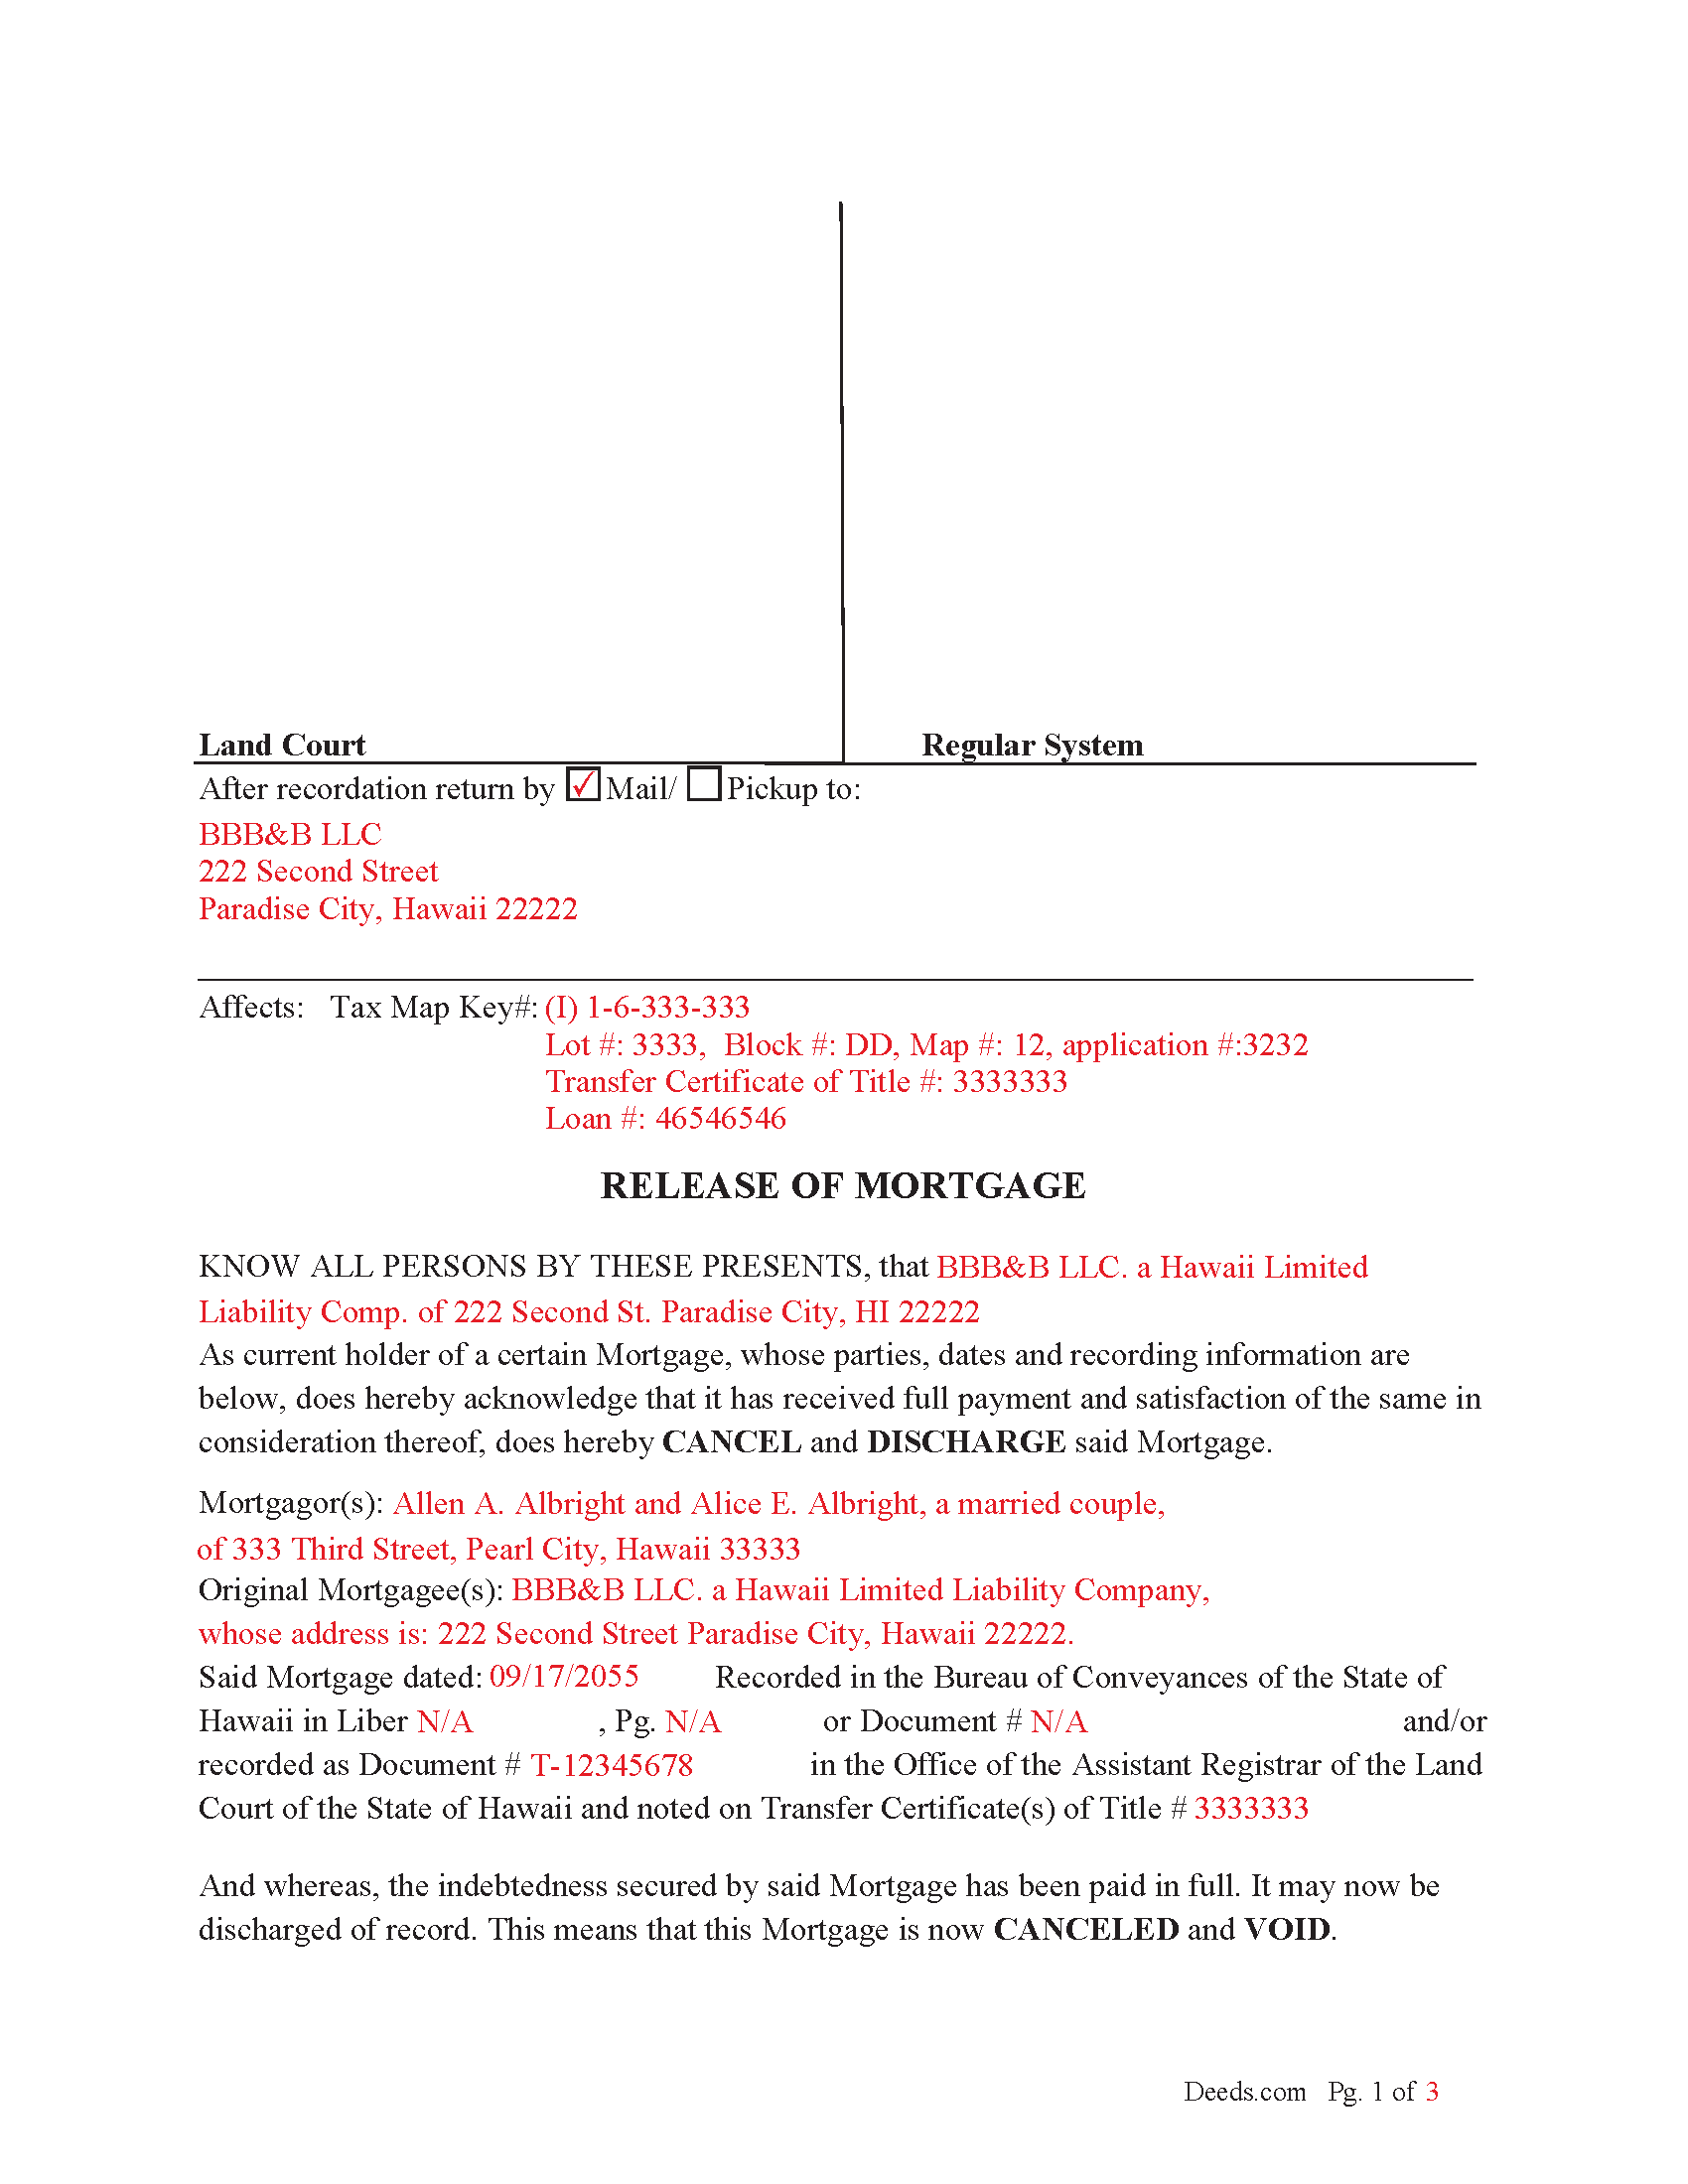 Completed Example of the Release of Mortgage Document